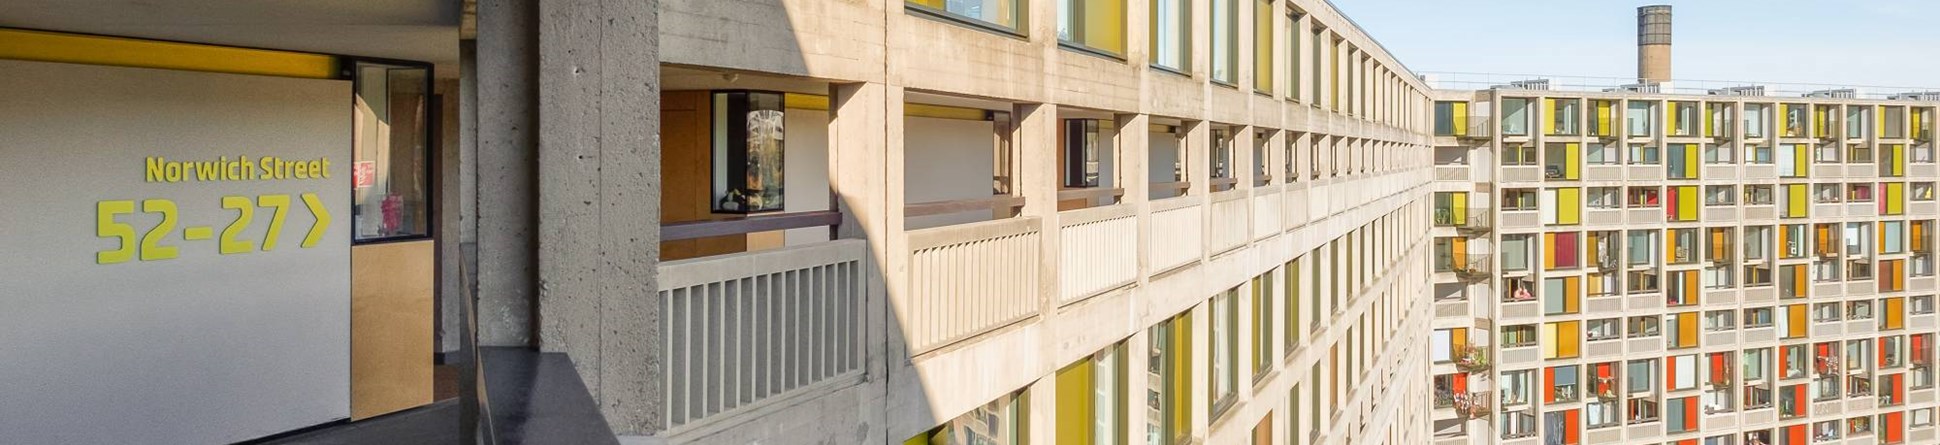 Phase 1 of Park Hill showing ‘streets in the sky’ corridor and external view of refurbished building façade. The facade displays the original concrete framing and bold coloured panels next to the windows.  